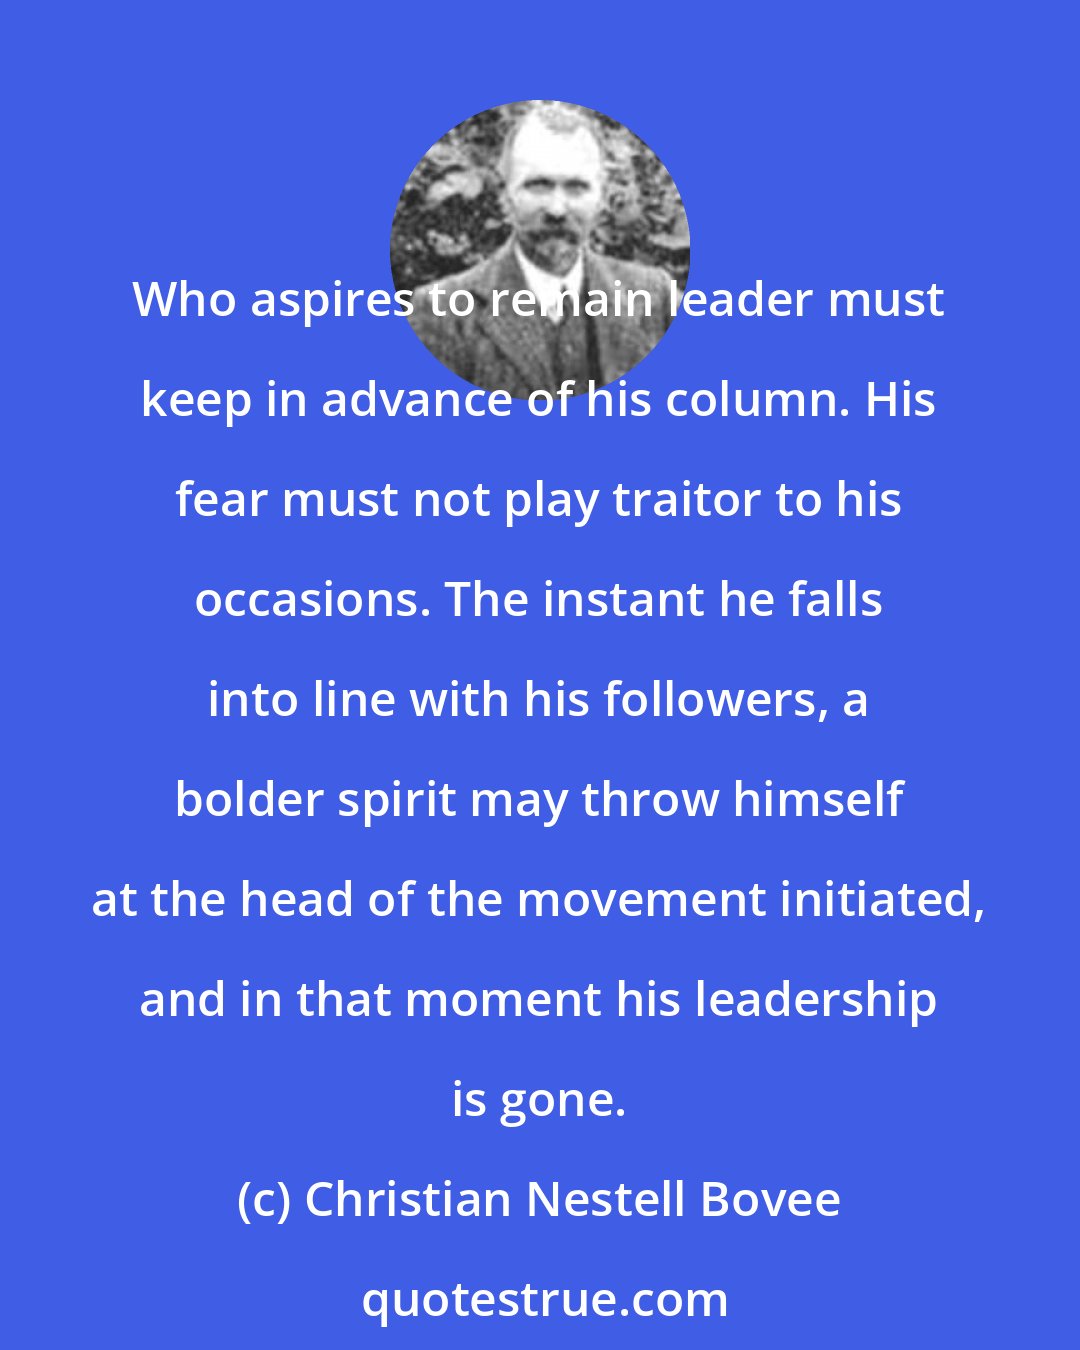 Christian Nestell Bovee: Who aspires to remain leader must keep in advance of his column. His fear must not play traitor to his occasions. The instant he falls into line with his followers, a bolder spirit may throw himself at the head of the movement initiated, and in that moment his leadership is gone.